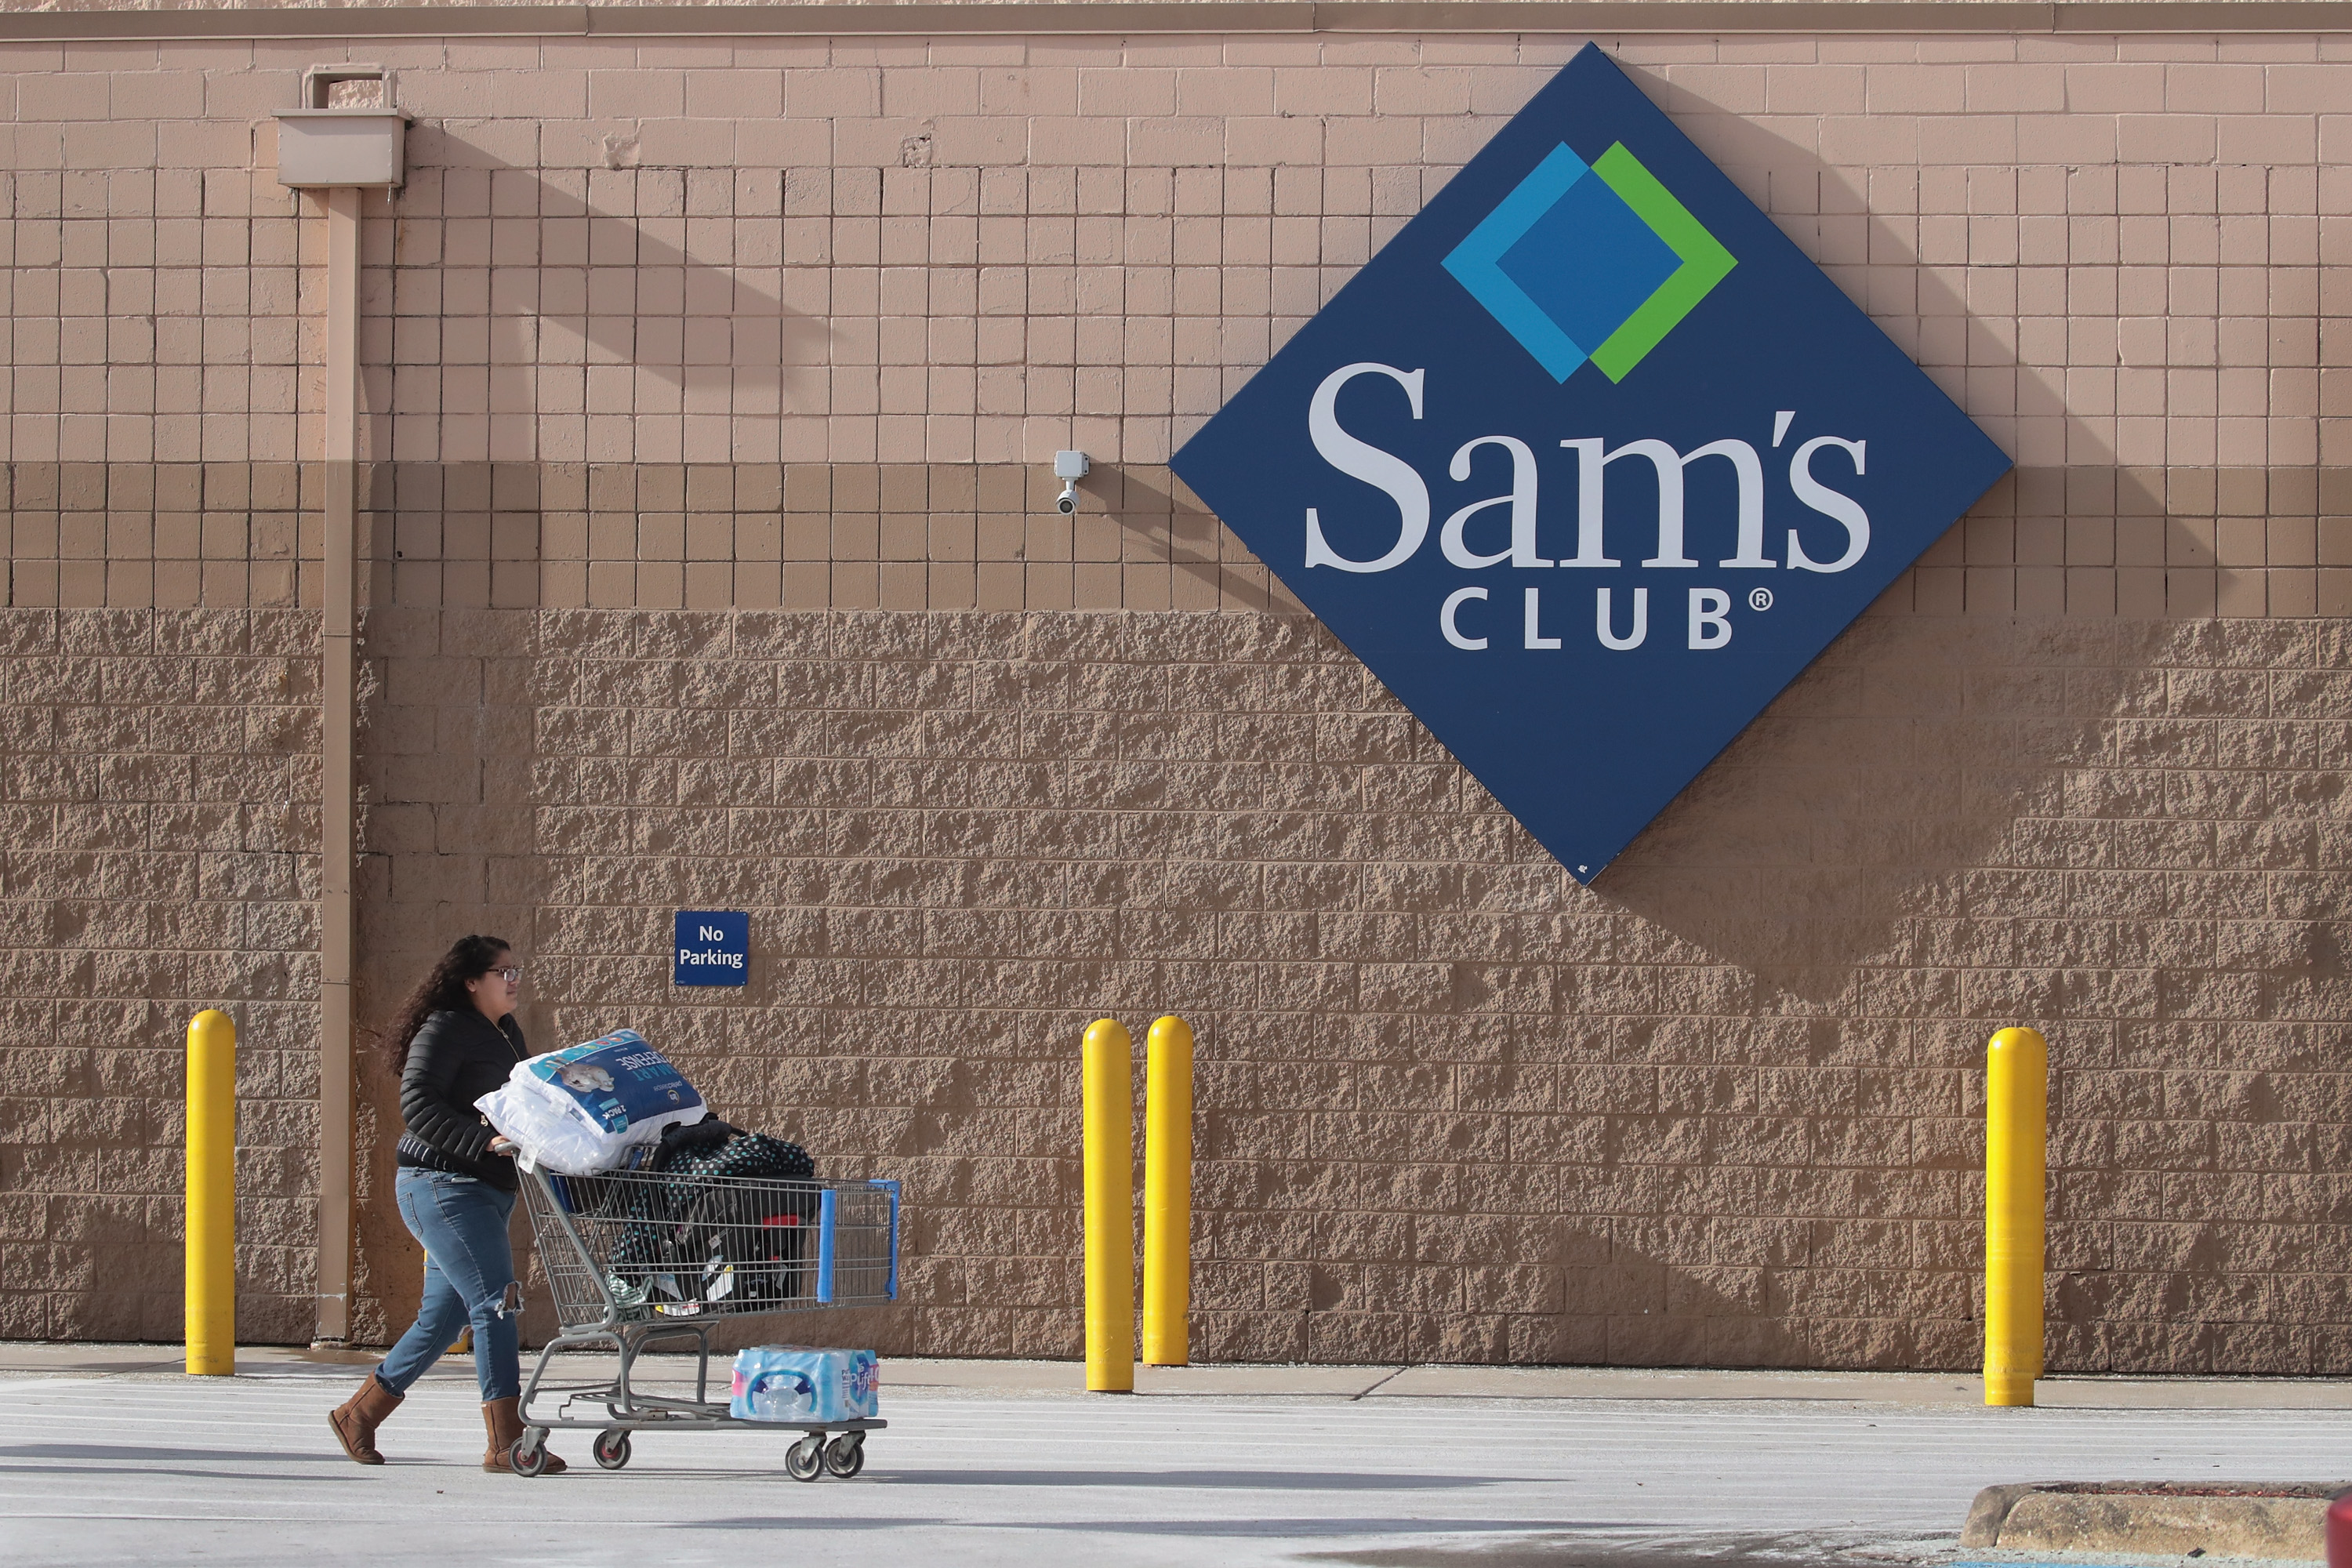 Buying a Sam's Club membership is about to get more expensive